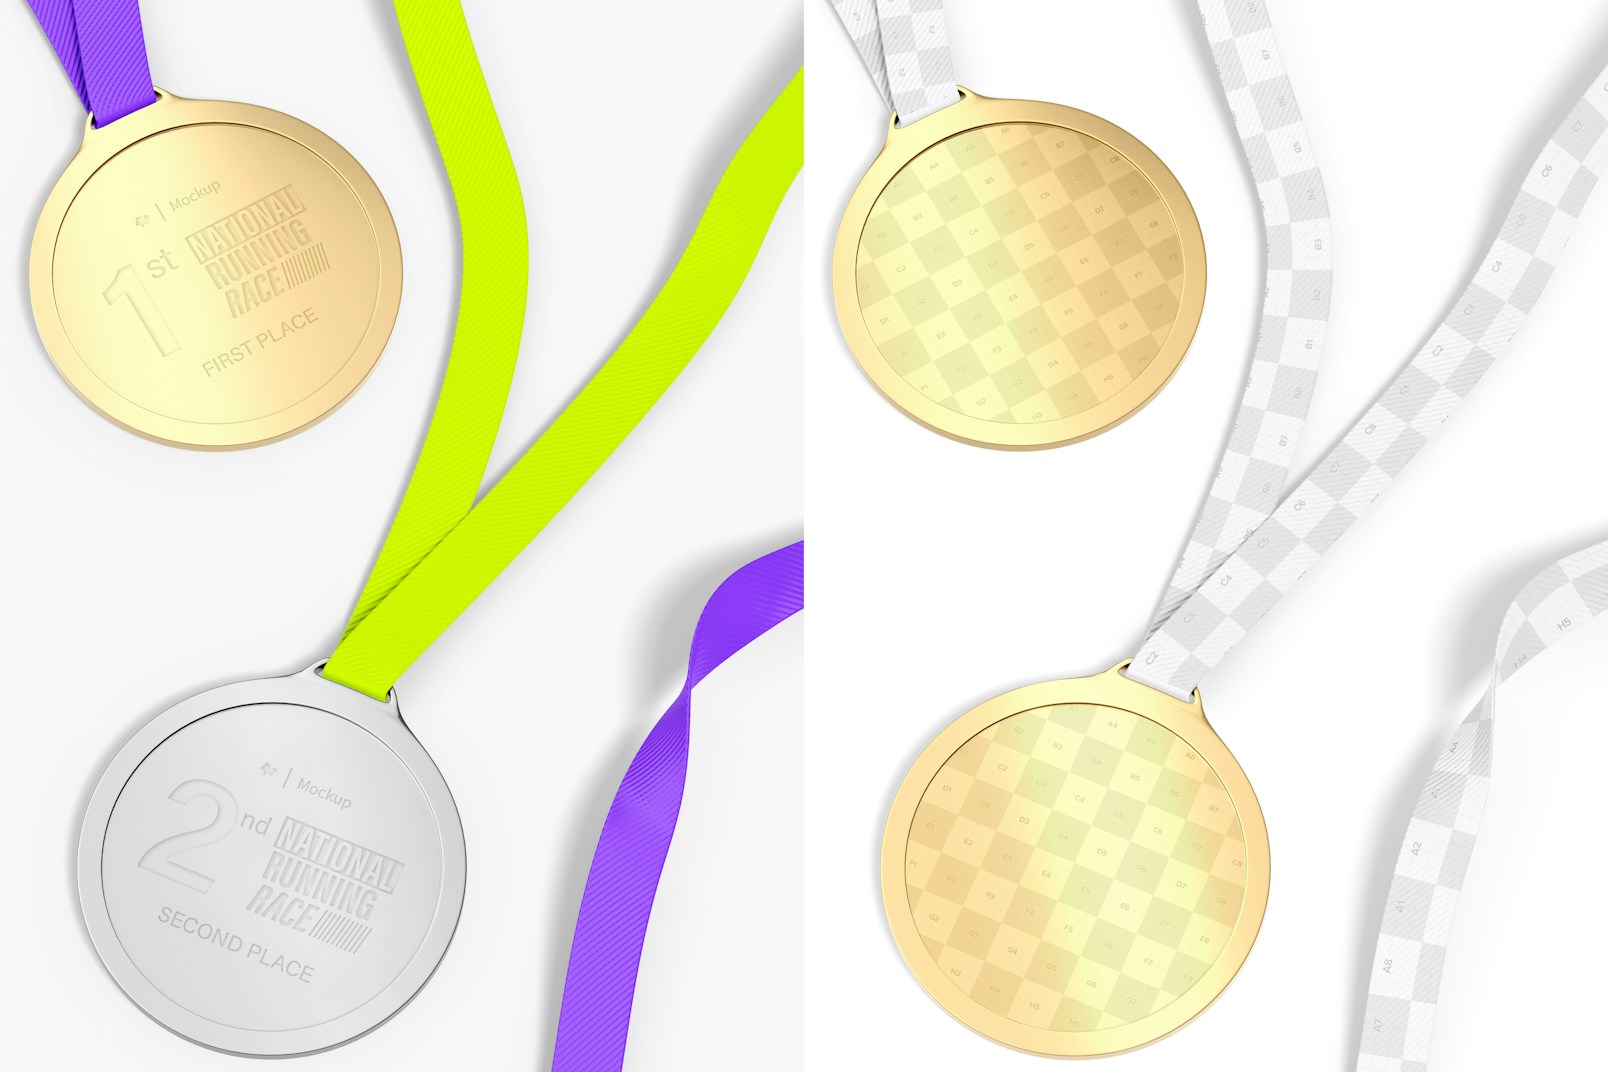 Round Medals Mockup, Top View